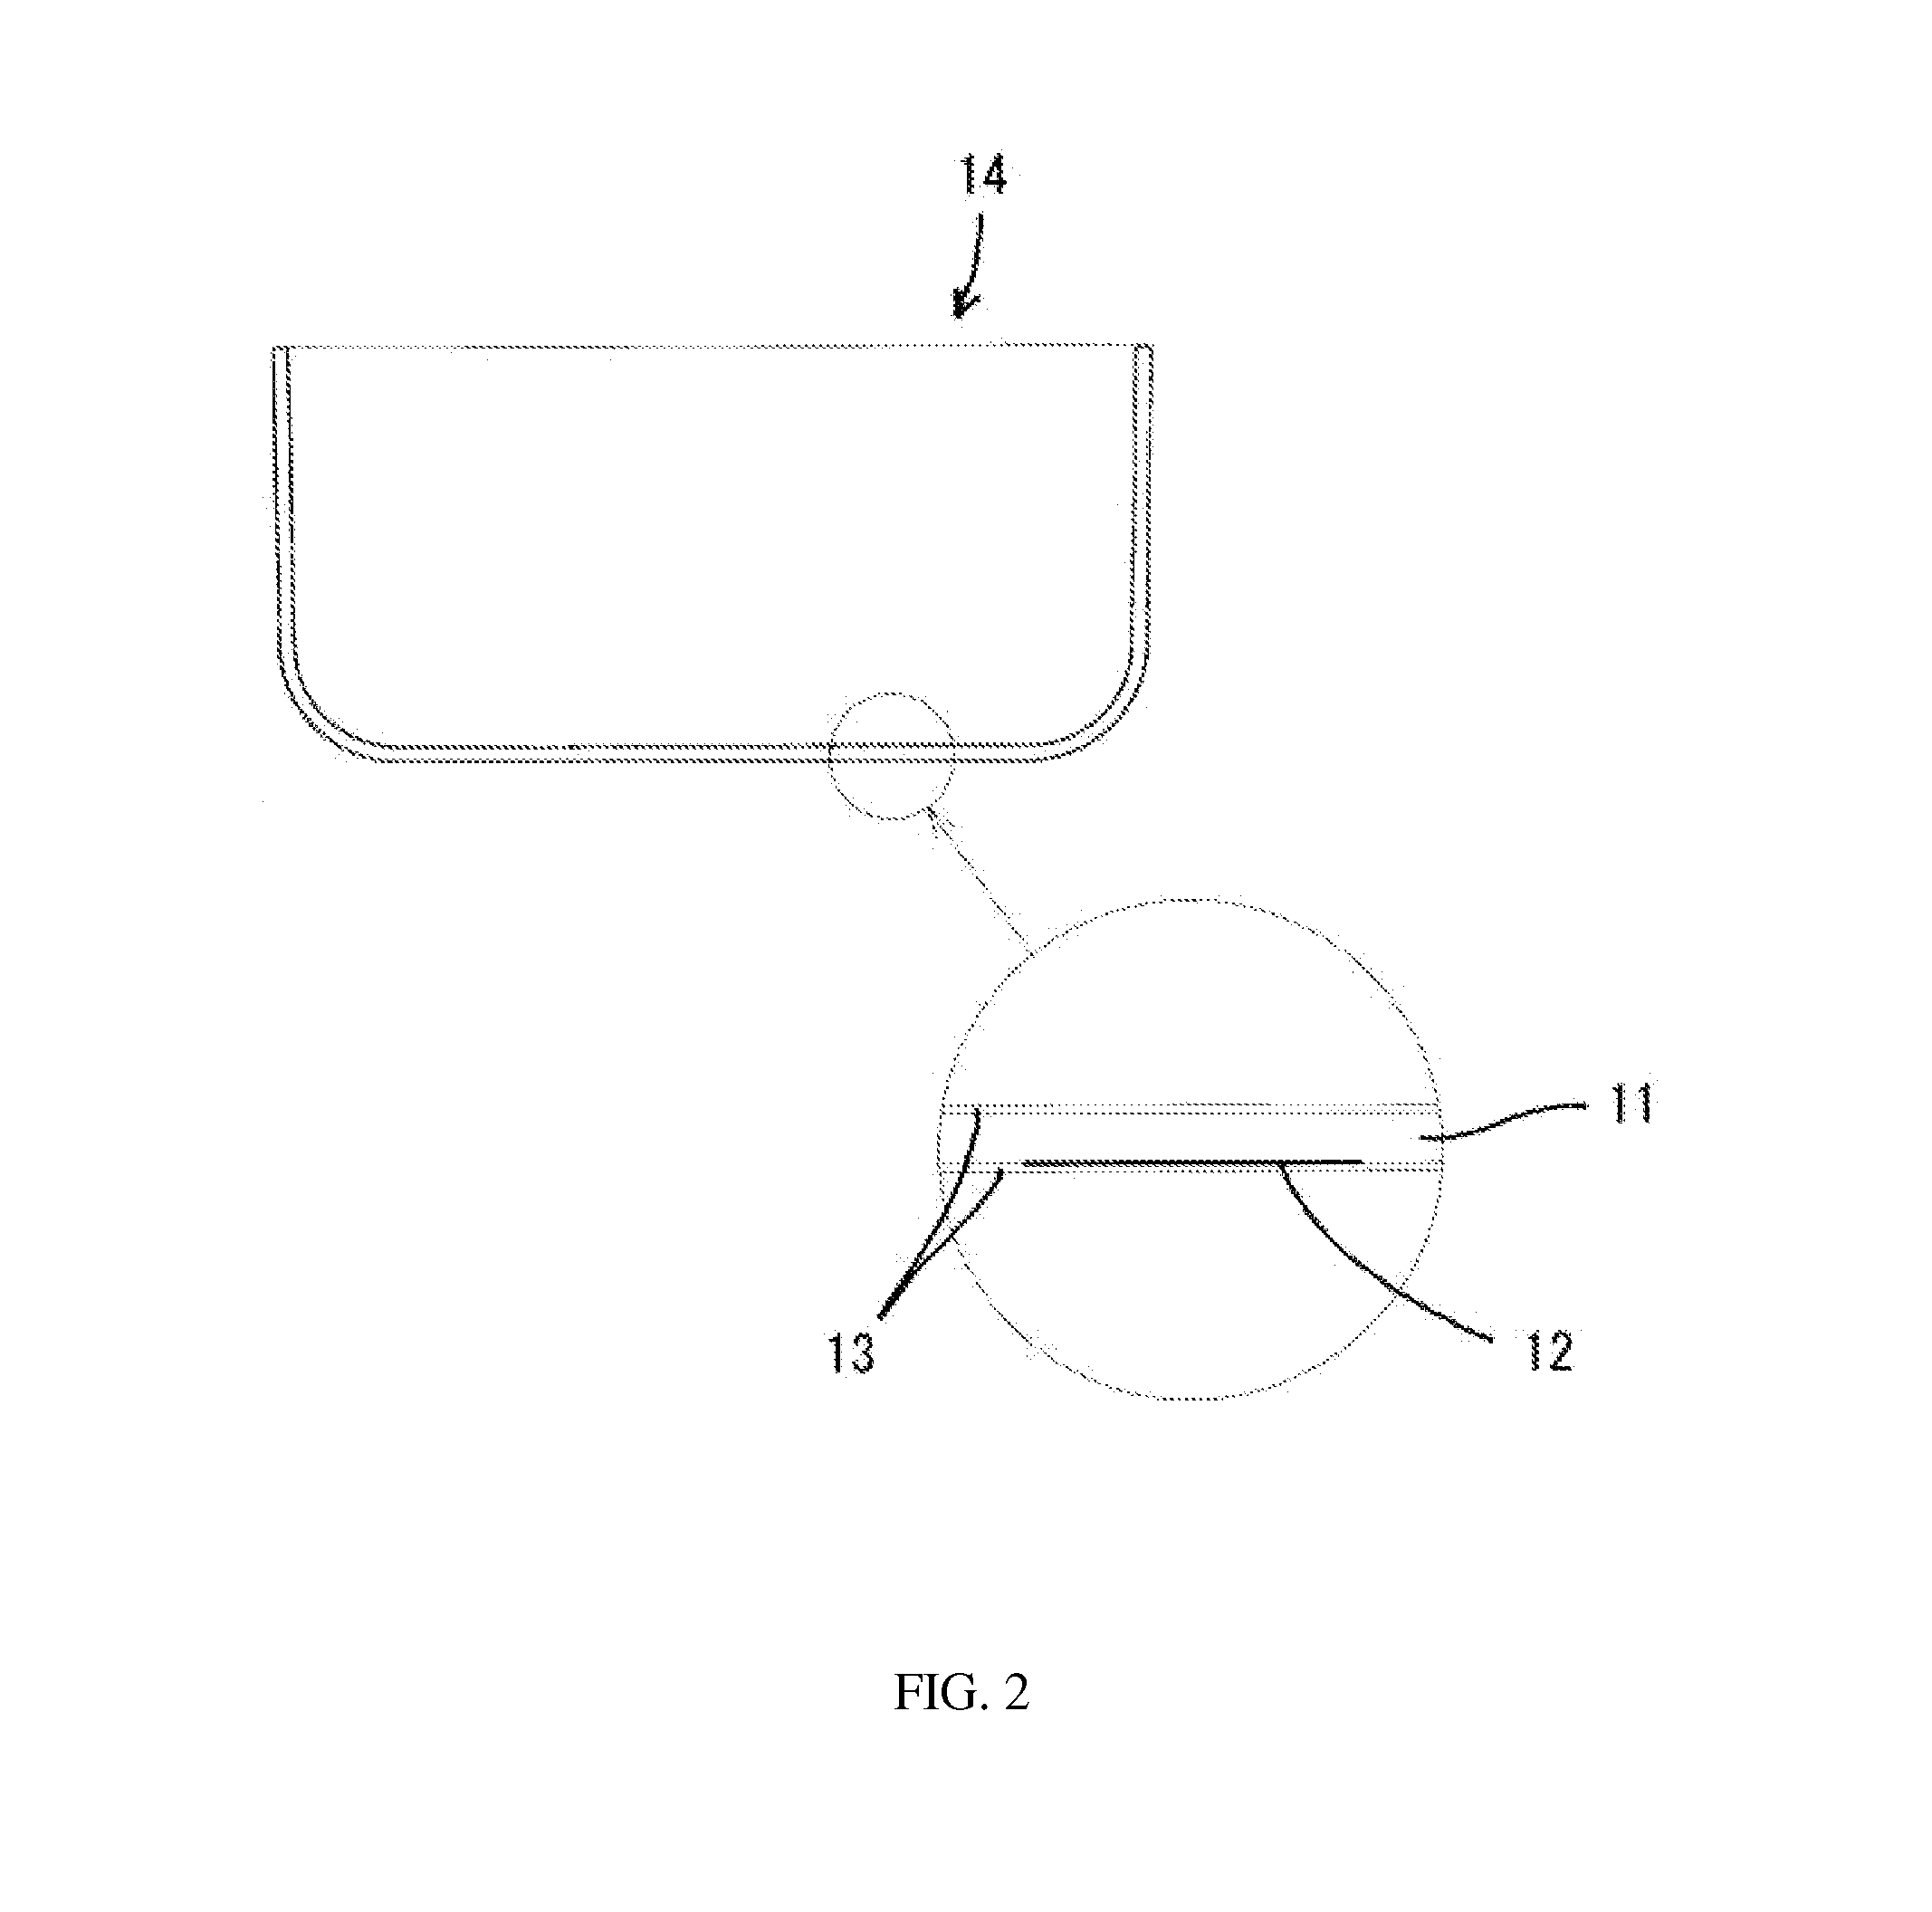 Product having traceability displayed thereon and method for displaying traceability of product